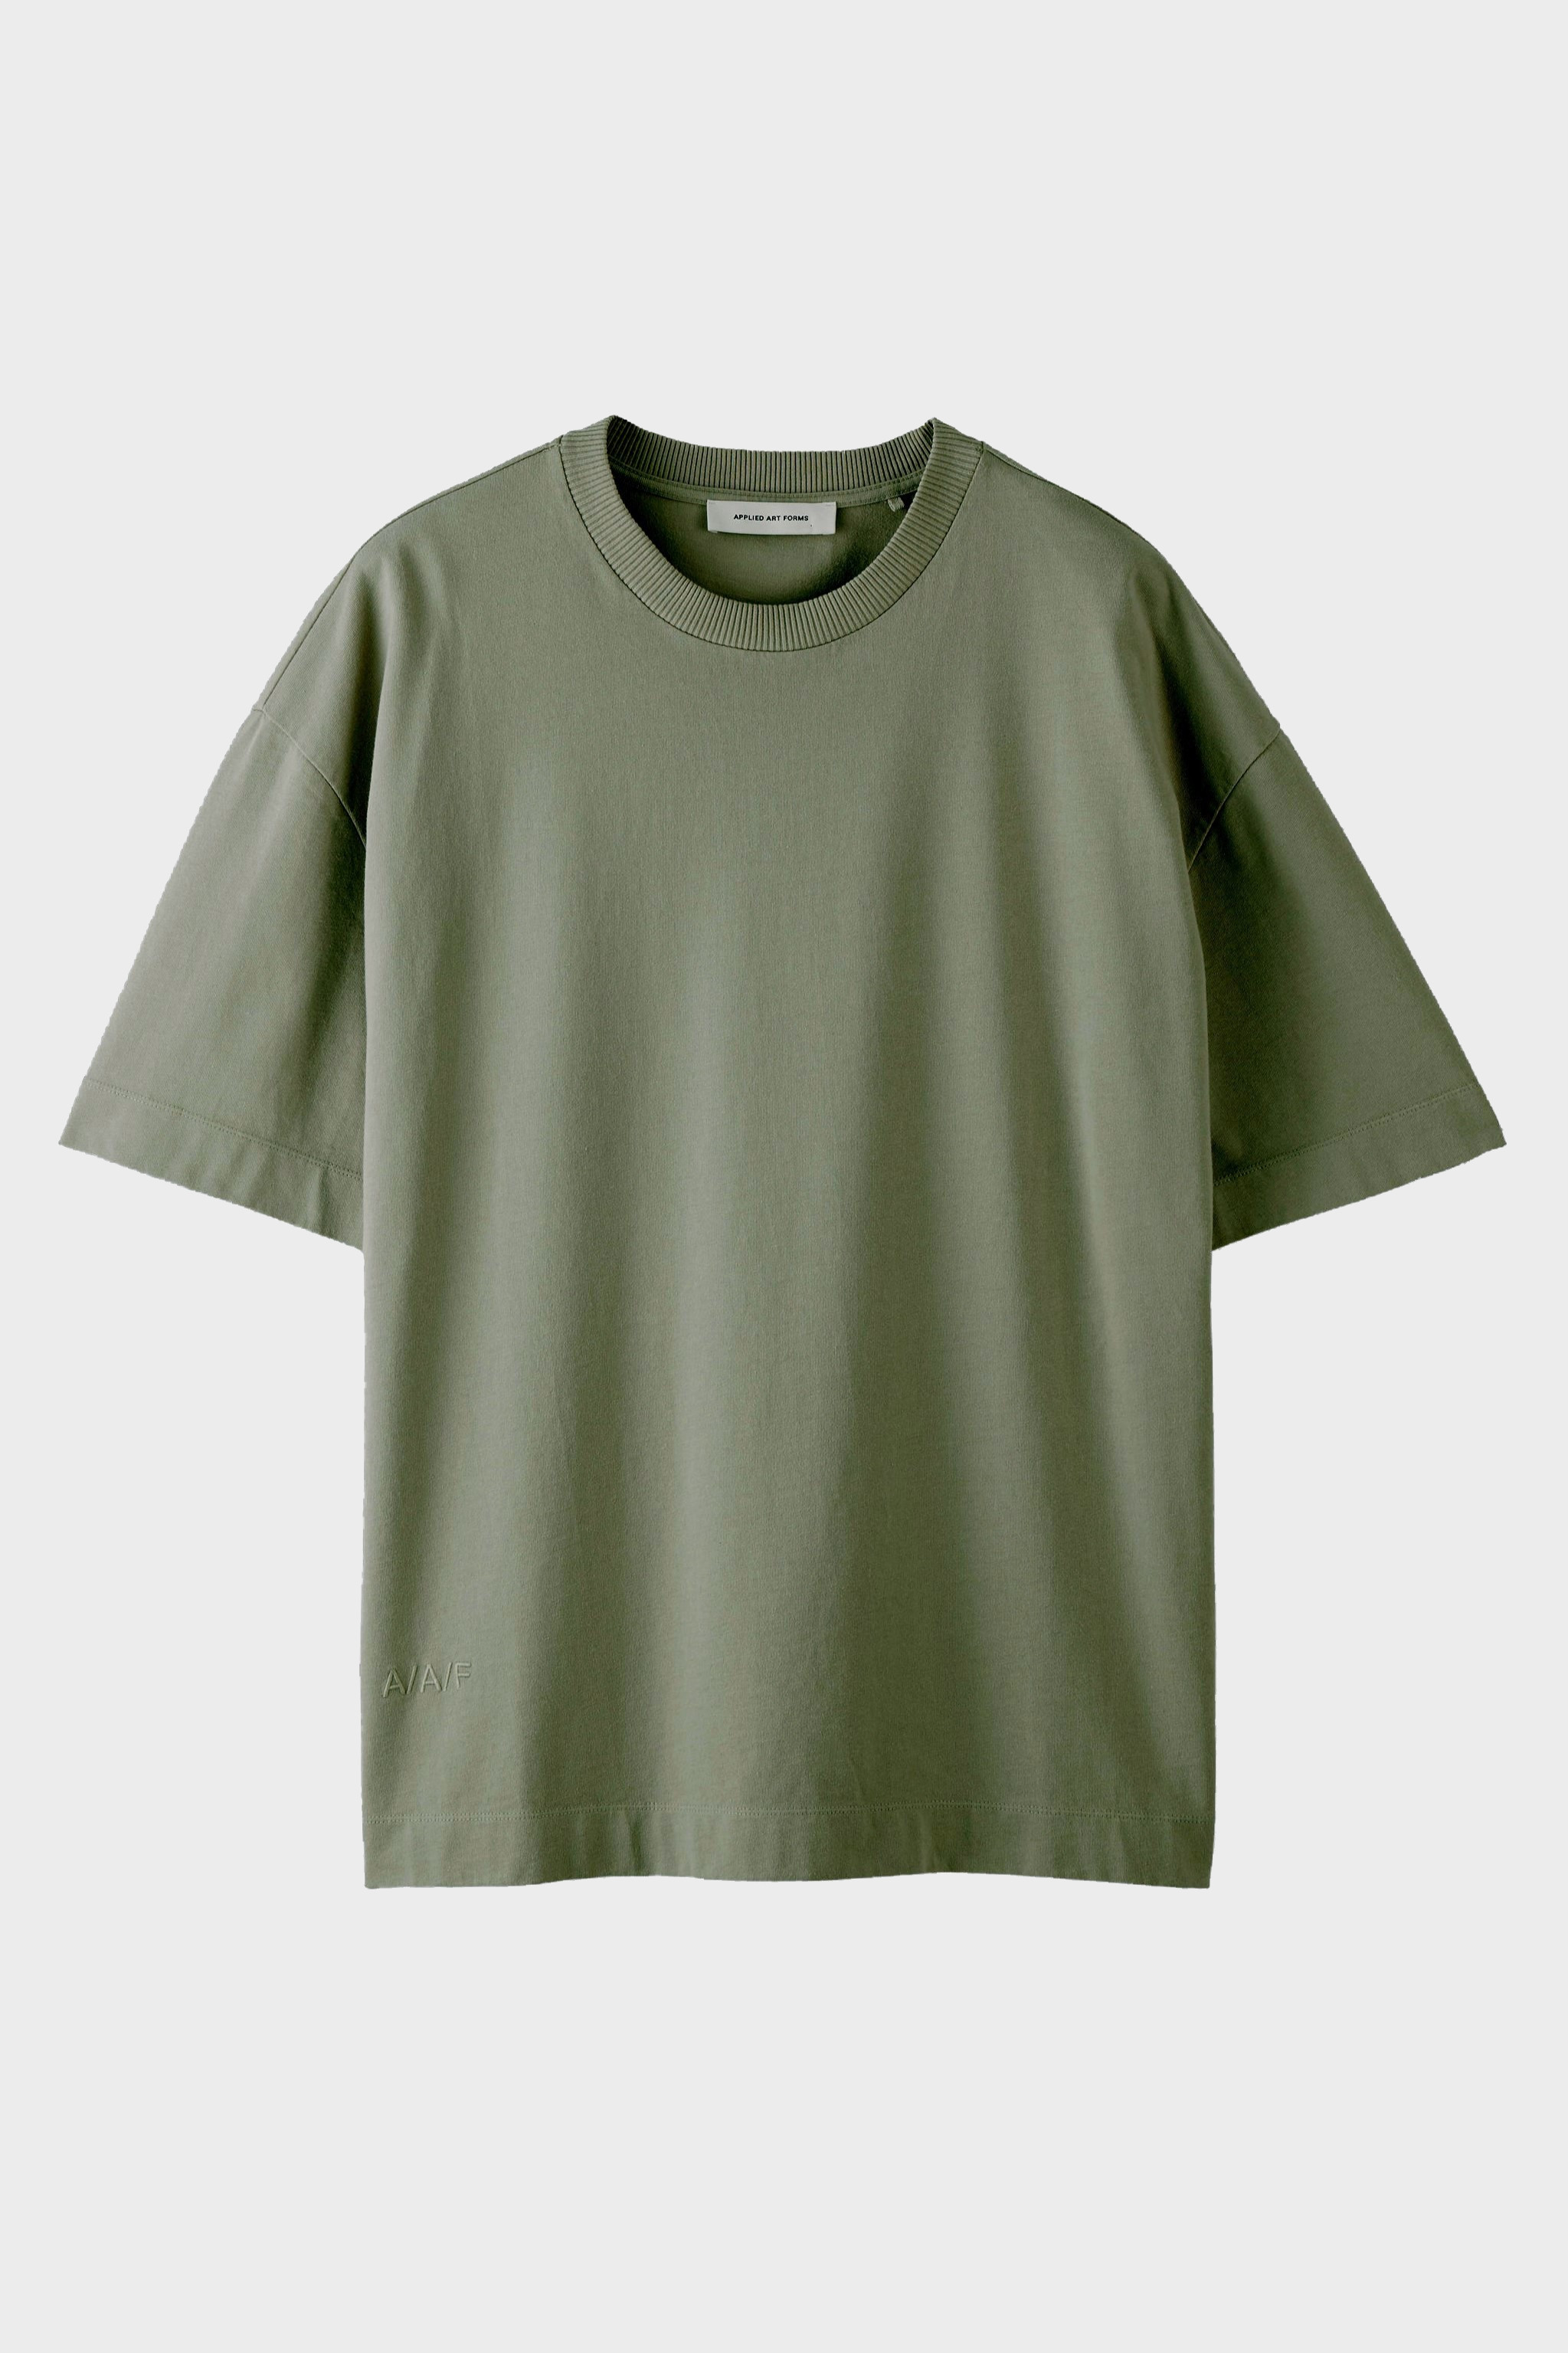 APPLIED ART FORMS Oversize T-Shirt in Dust Green